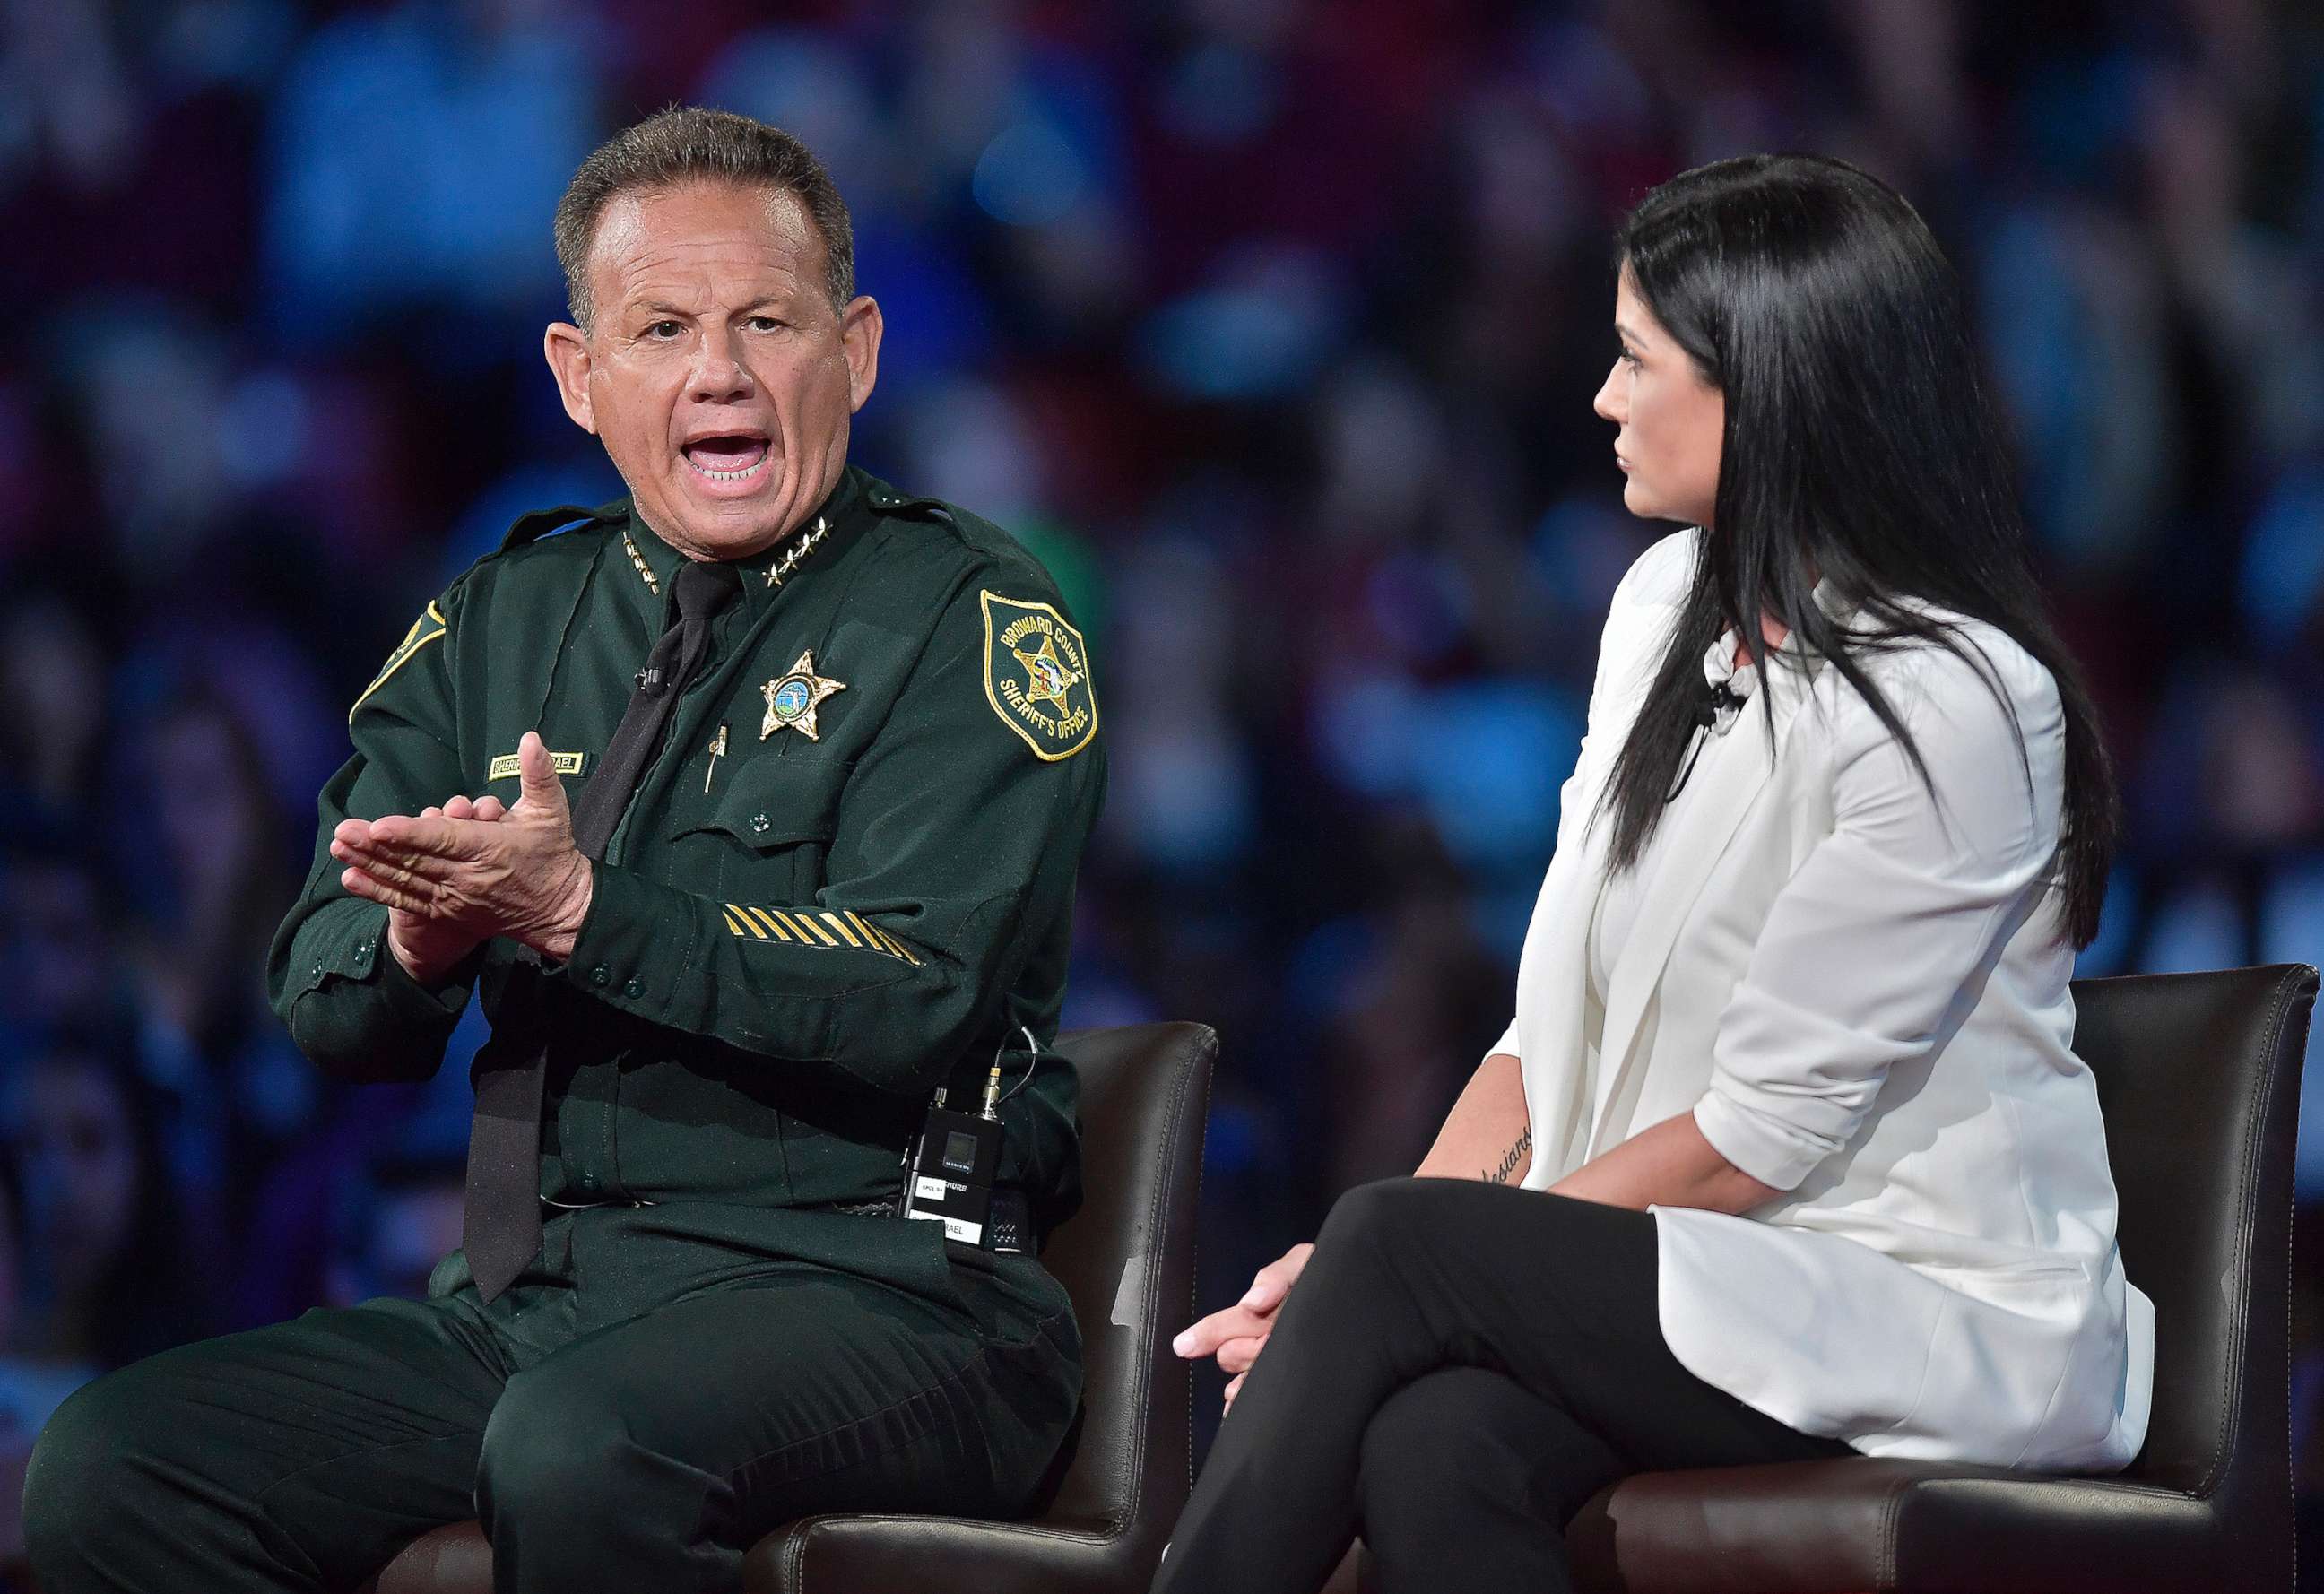 PHOTO: Broward Sheriff Scott Israel makes a point to NRA Spokesperson Dana Loesch during a CNN town hall meeting, Feb. 21, 2018, at the BB&T Center in Sunrise, Fla.